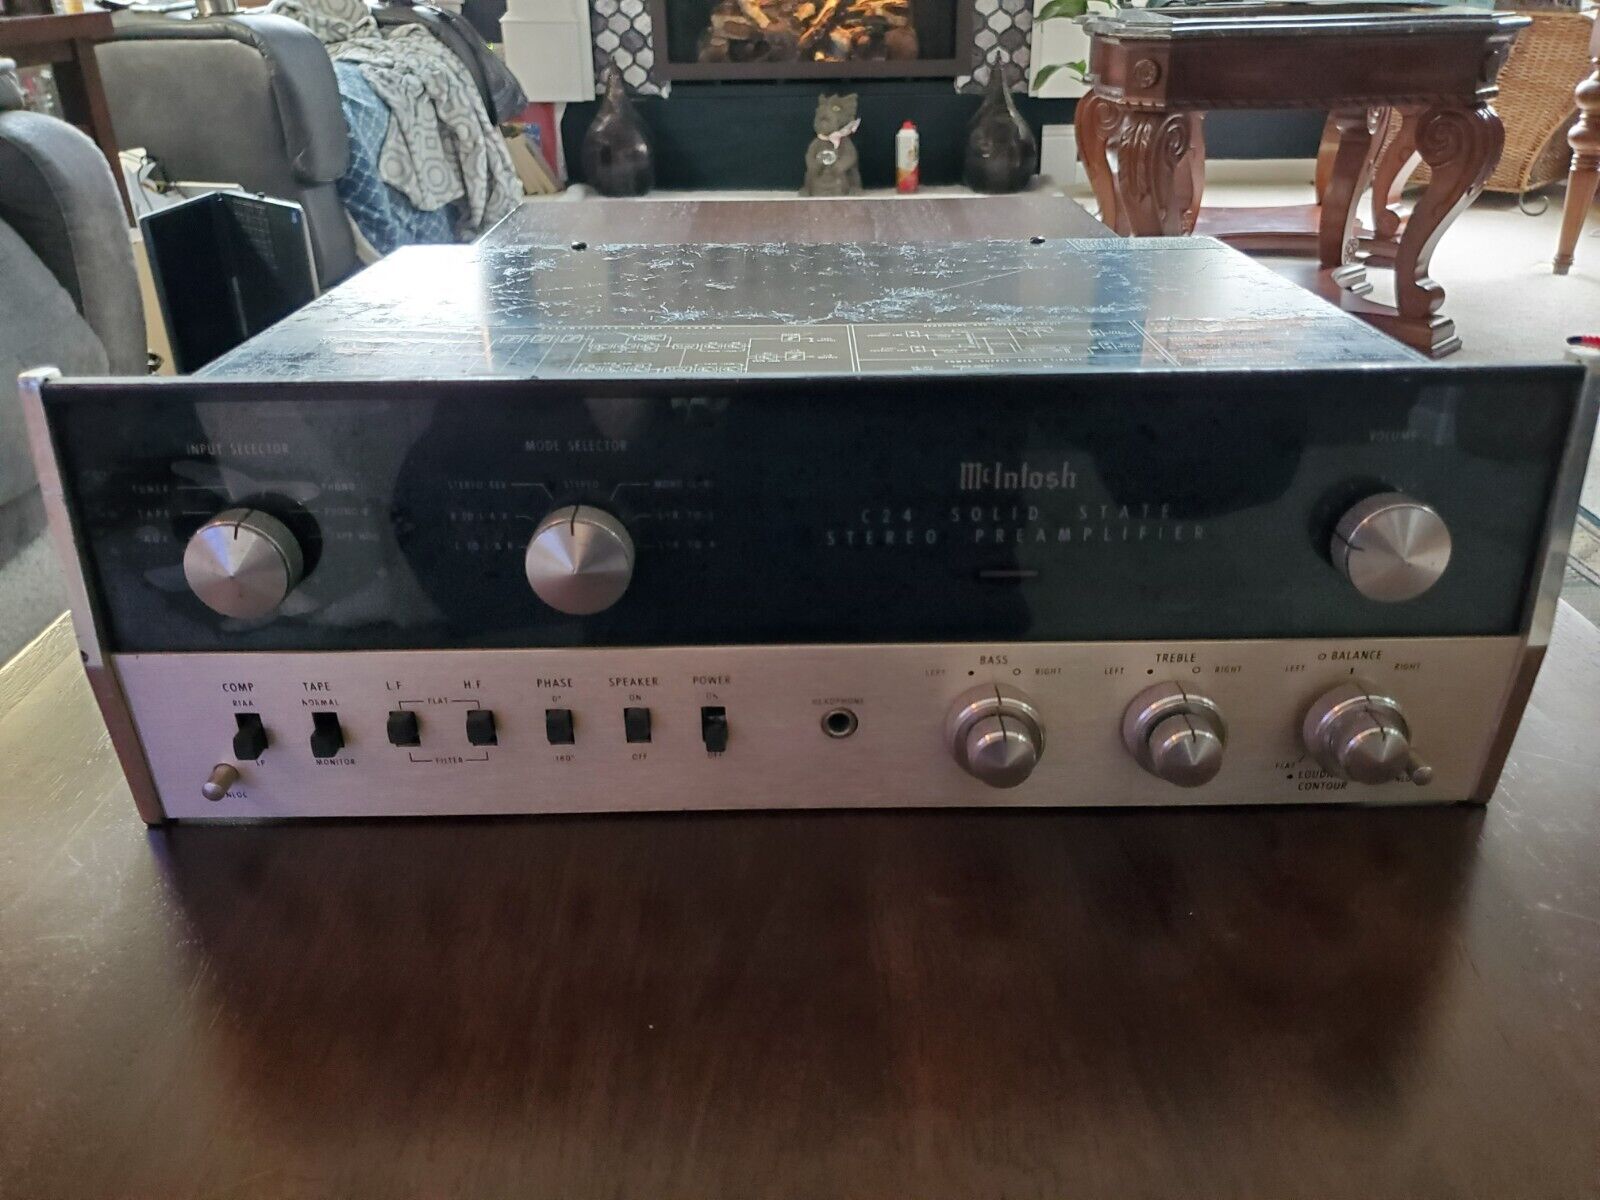 Vintage McIntosh C24 Stereo Preamplifier - For Parts Only